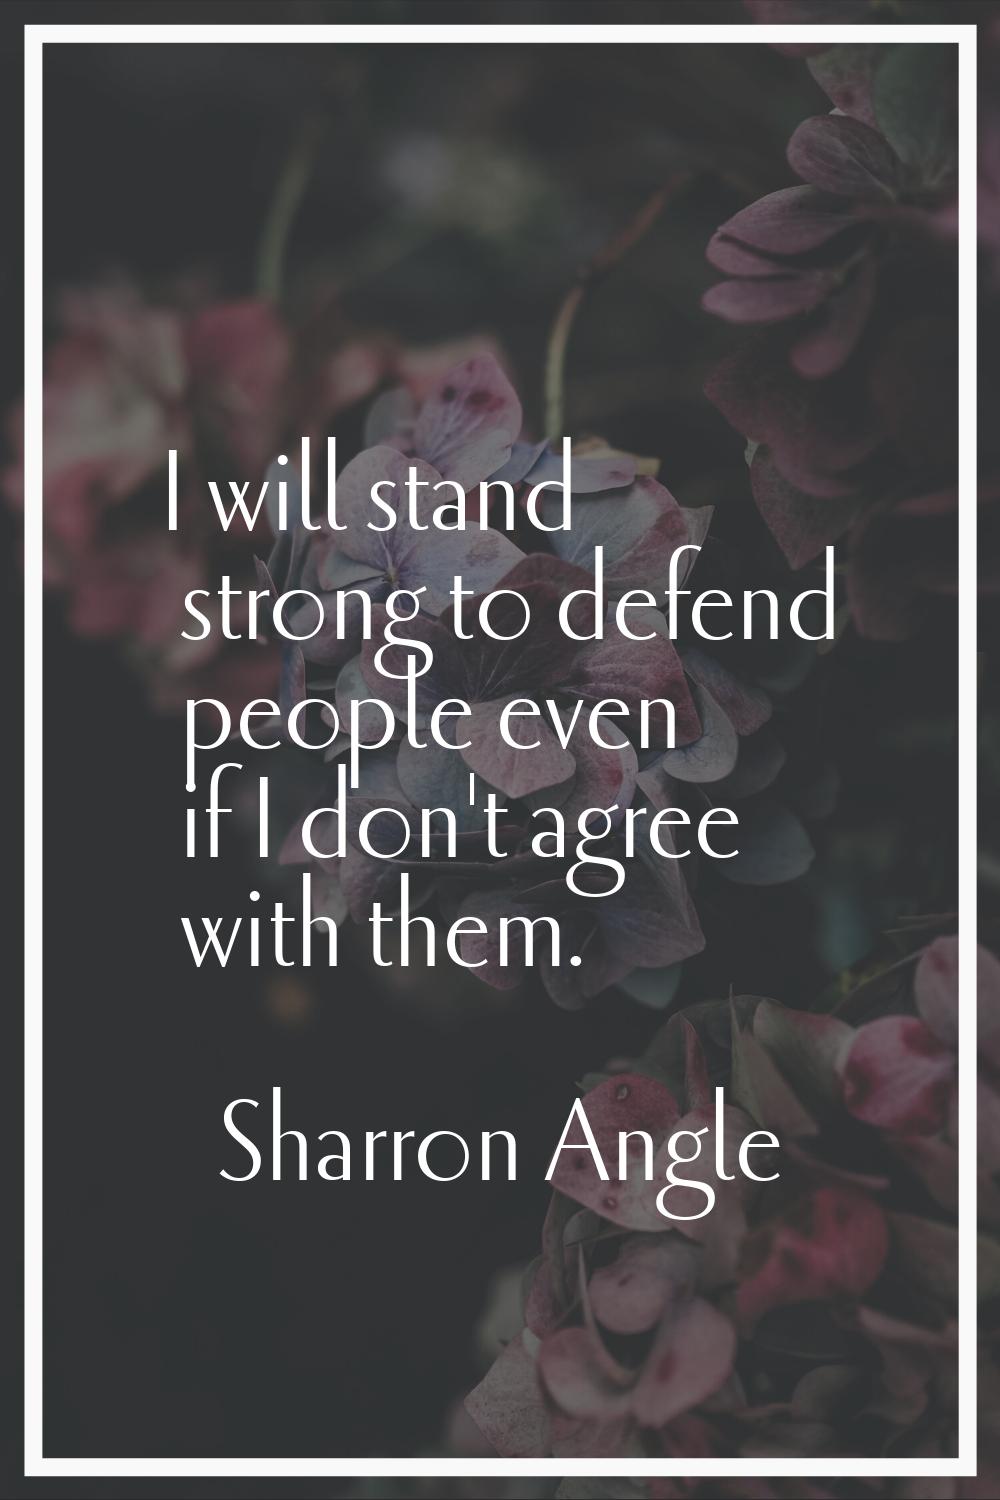 I will stand strong to defend people even if I don't agree with them.